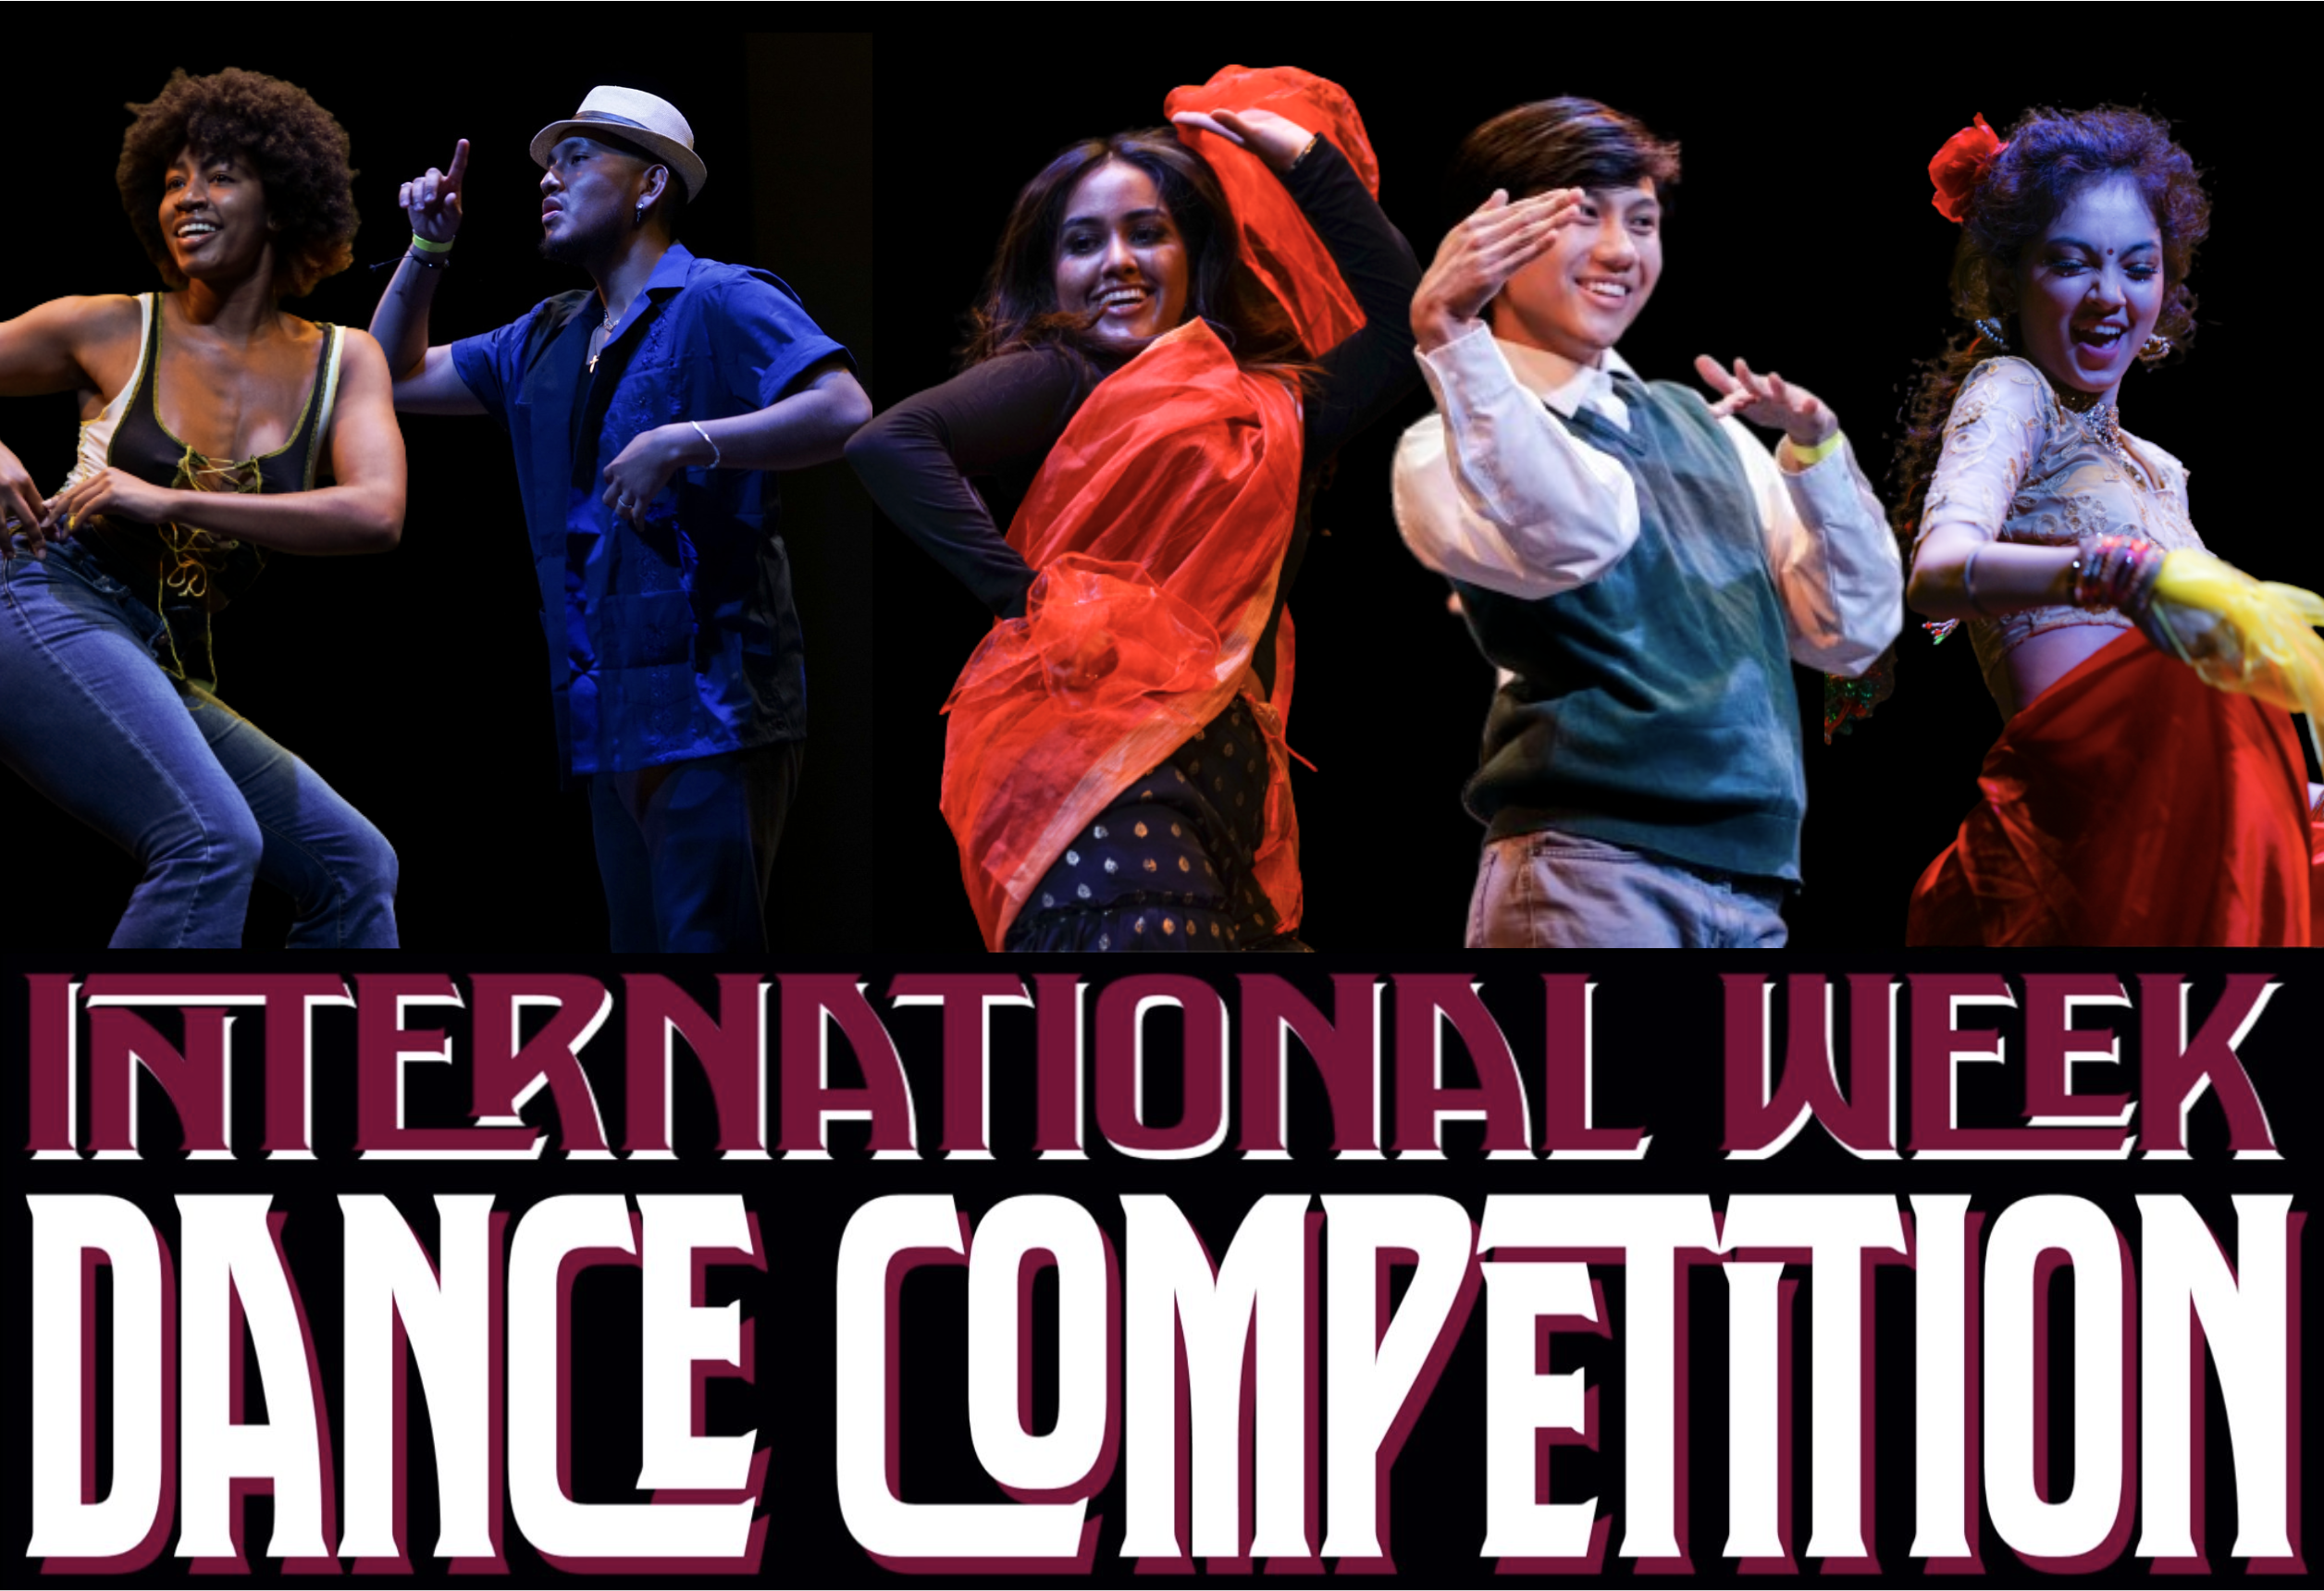 International week dance competition poster.